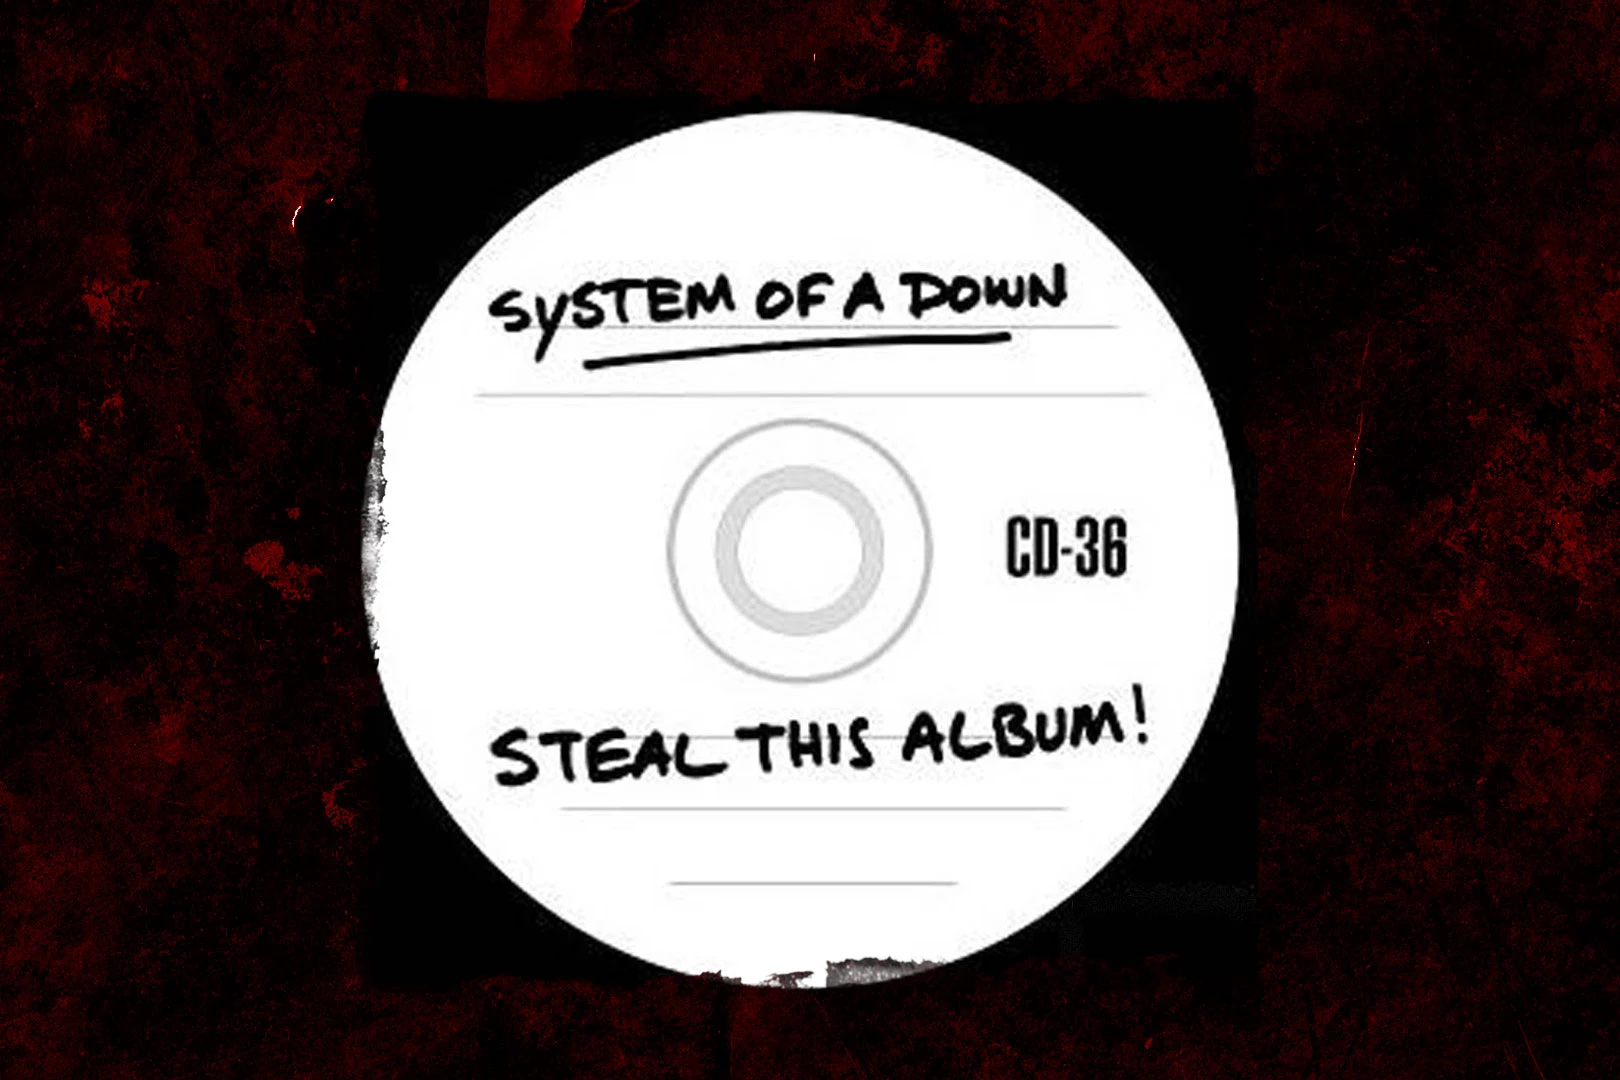 20 Years Ago: System of a Down Release 'Steal This Album'